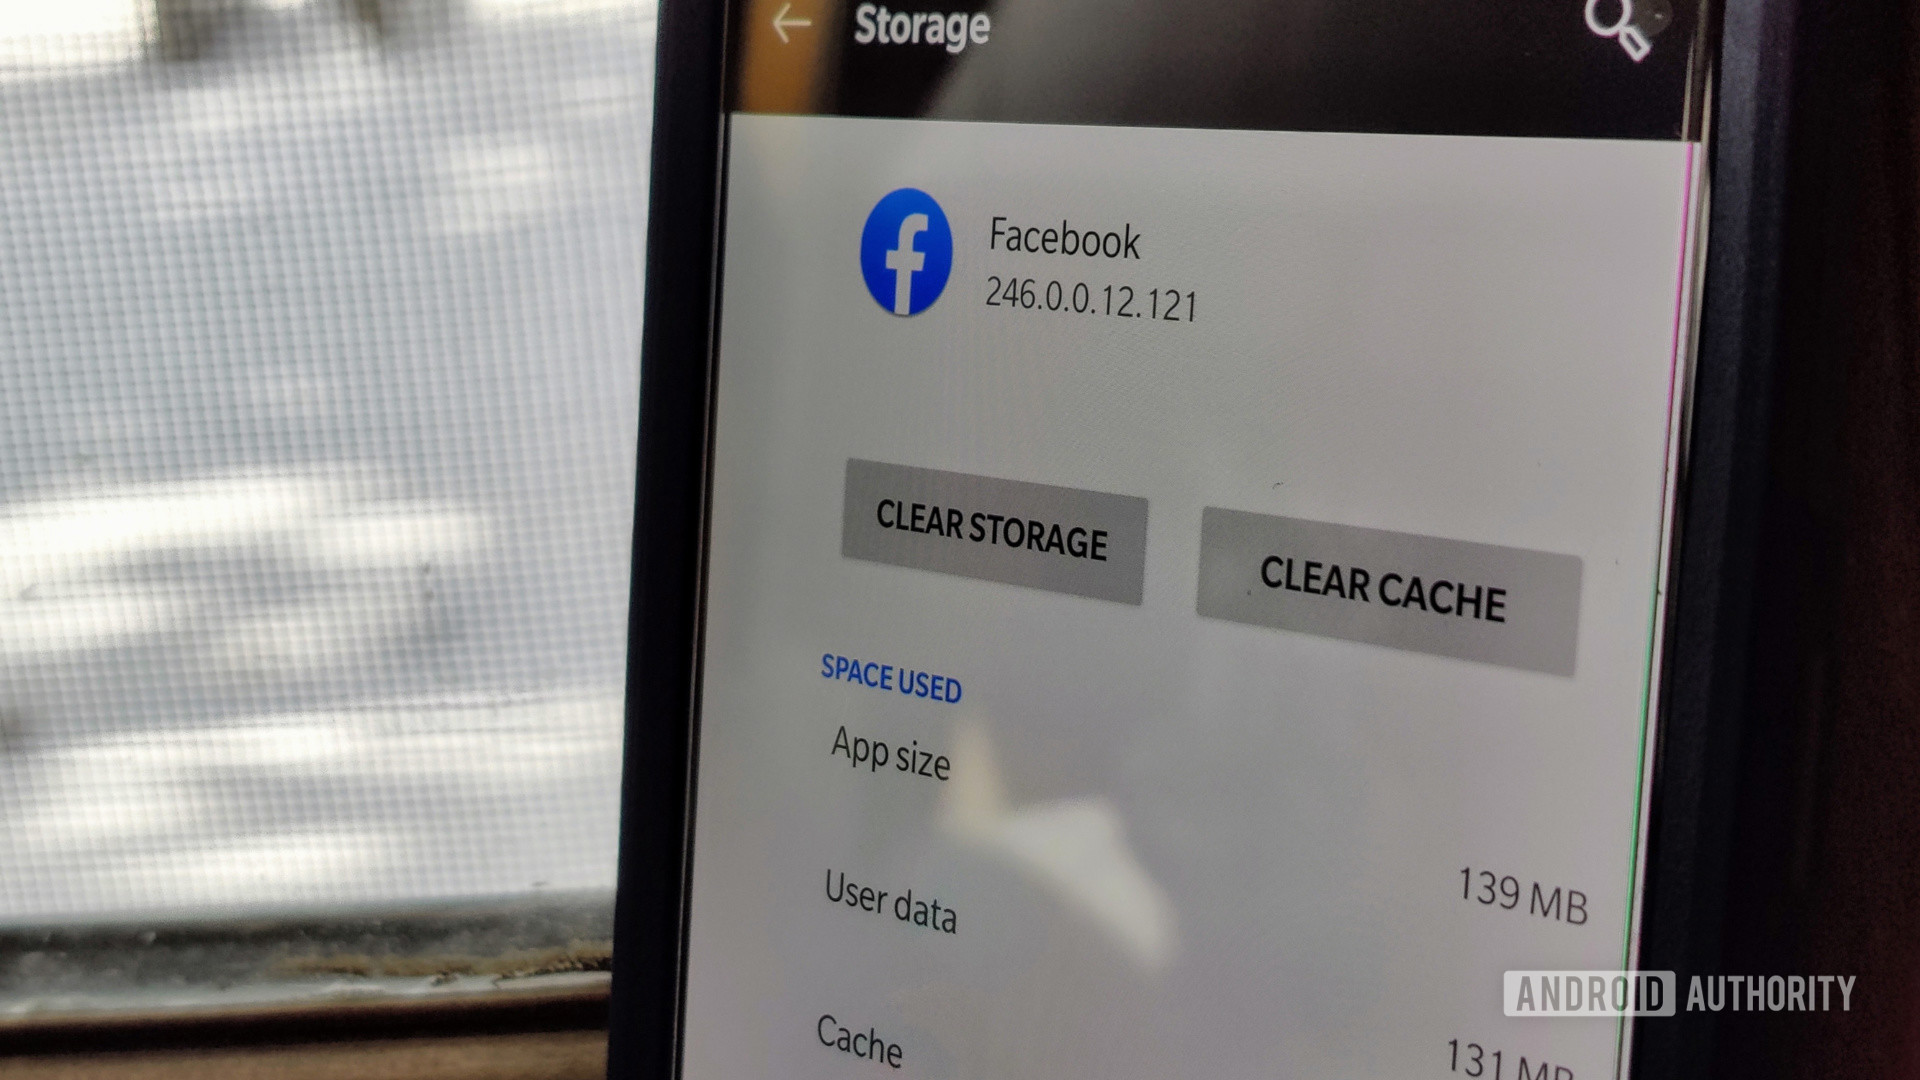 Facebook app cache in Settings 1 - How to free up storage space on Android